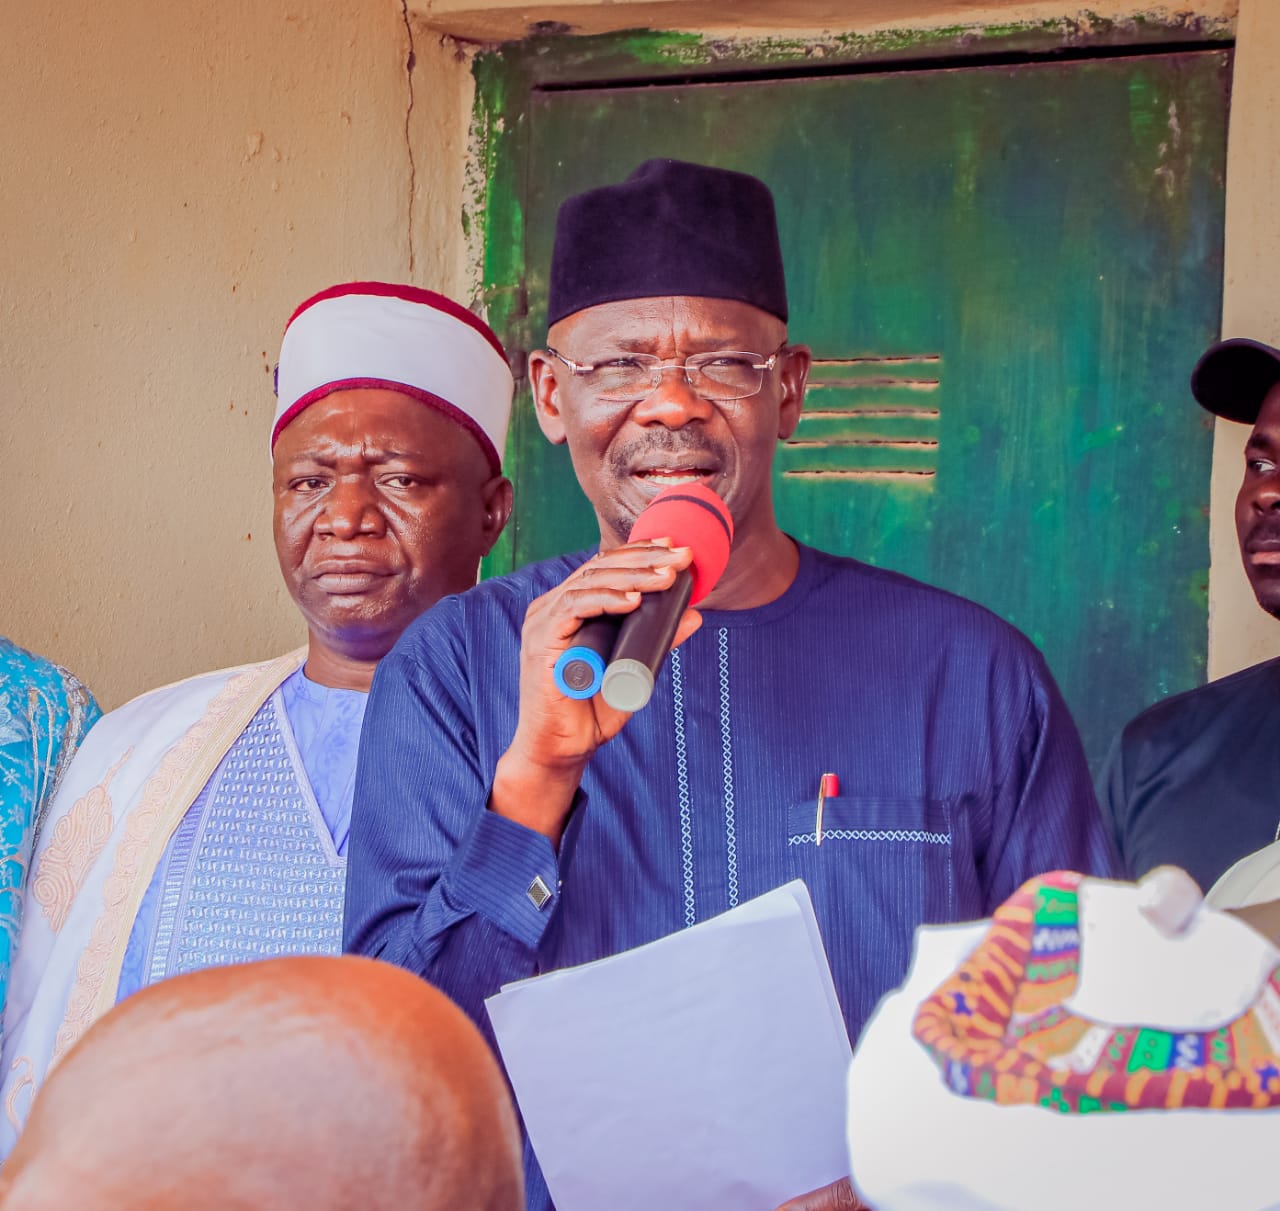 His Excellency, Engr. Abdullahi A. Sule, in company of Distinguished Senator Umaru Tanko Al-makura, distributes relief materials to victims of recent flood in Tunga, Awe Local Government Area, on Sunday, October, 2, 2022.